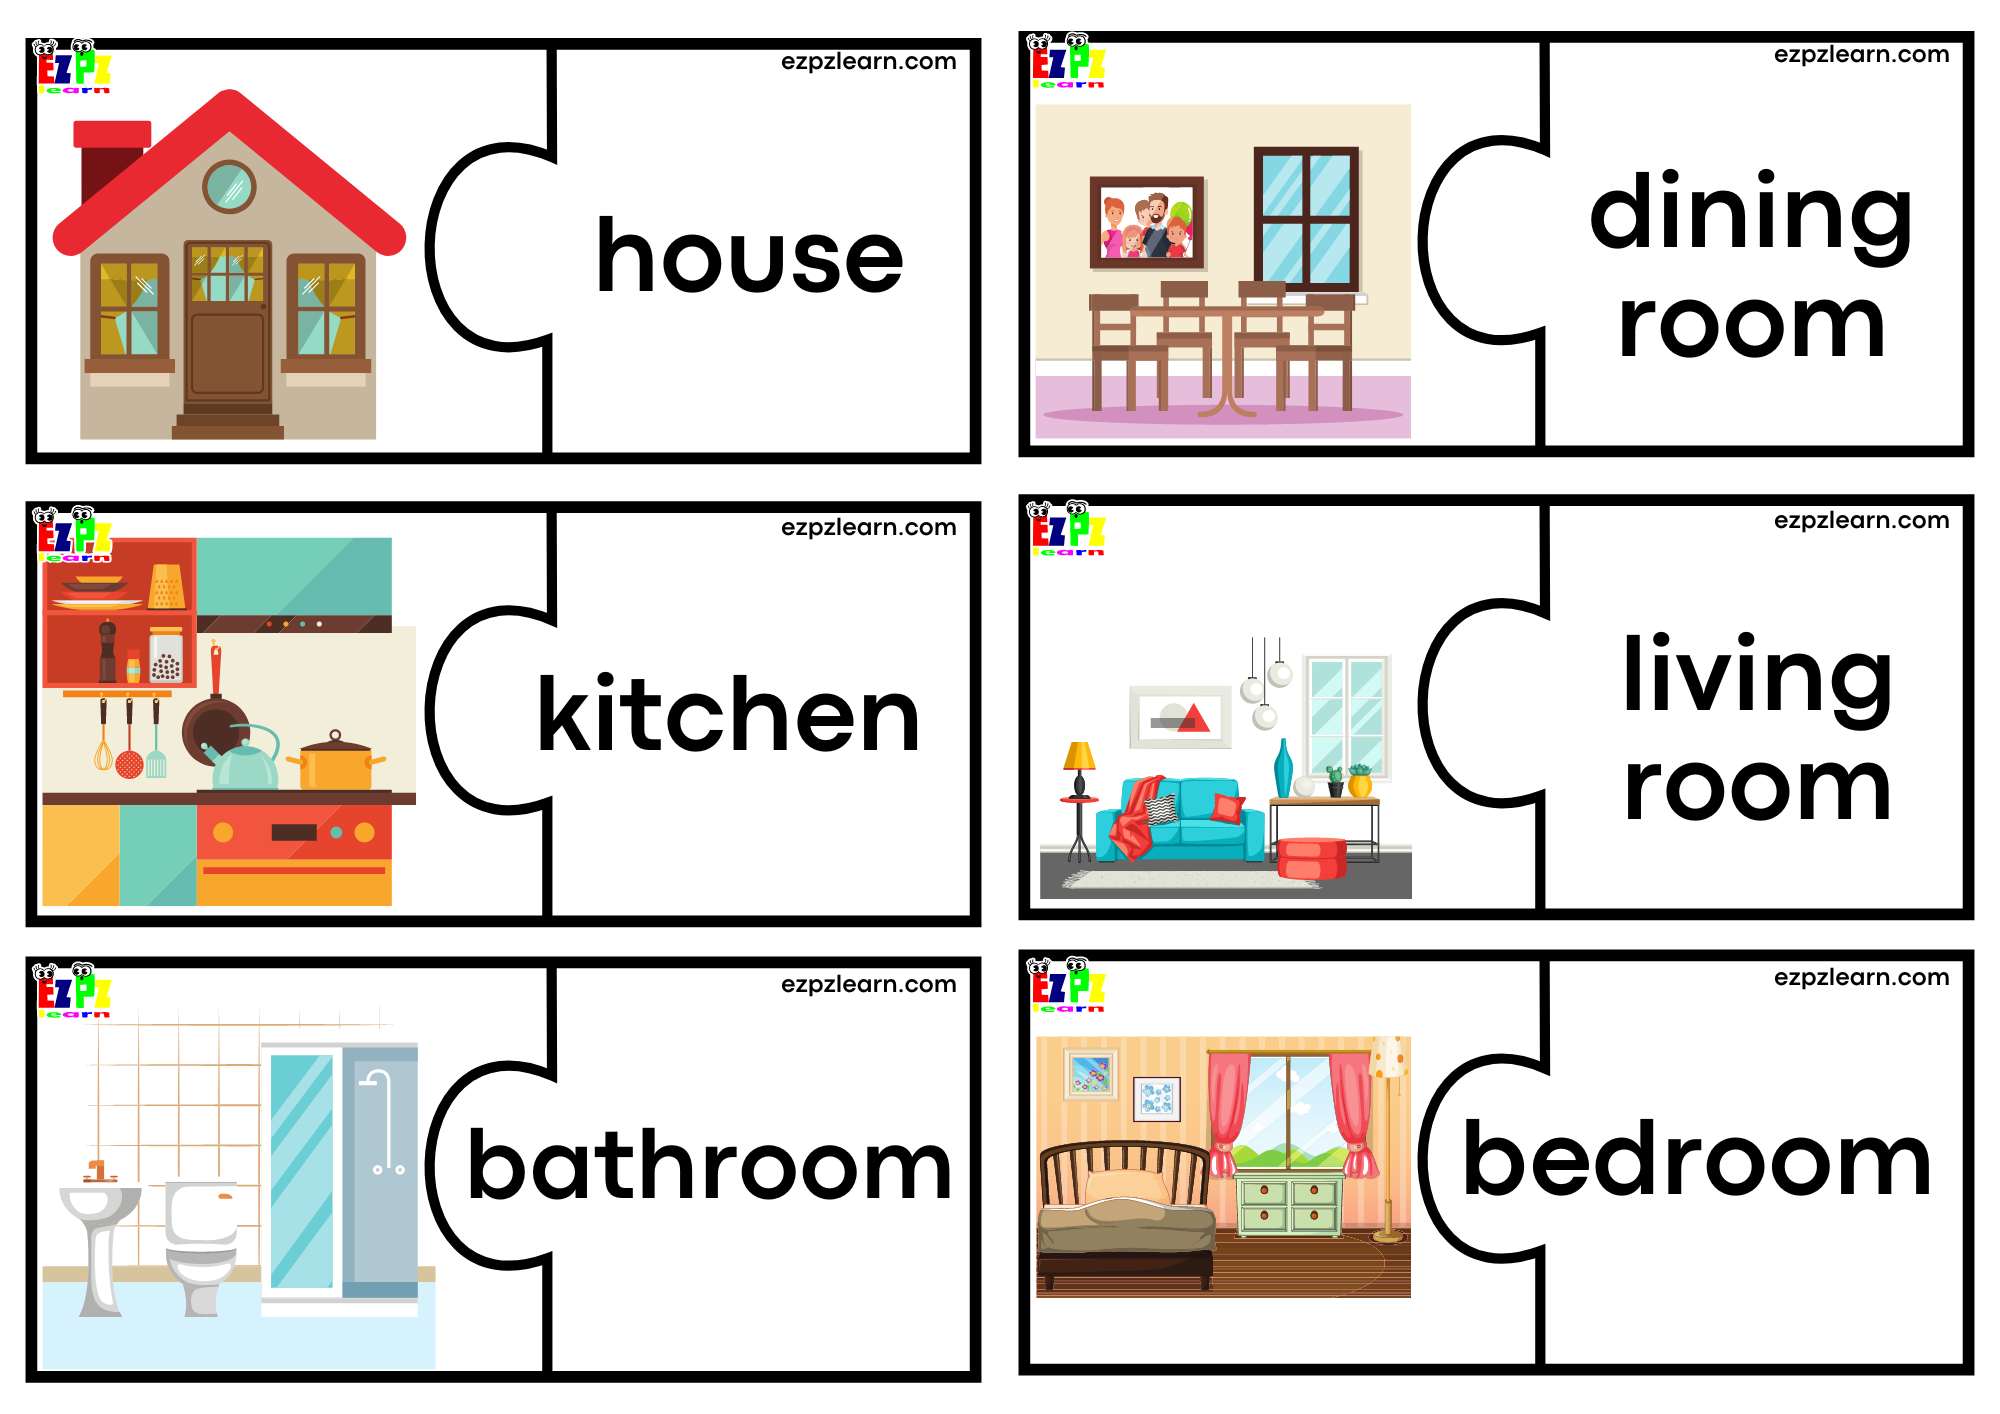 THE ROOMS OF THE HOUSE // VOCABULARY GAME 